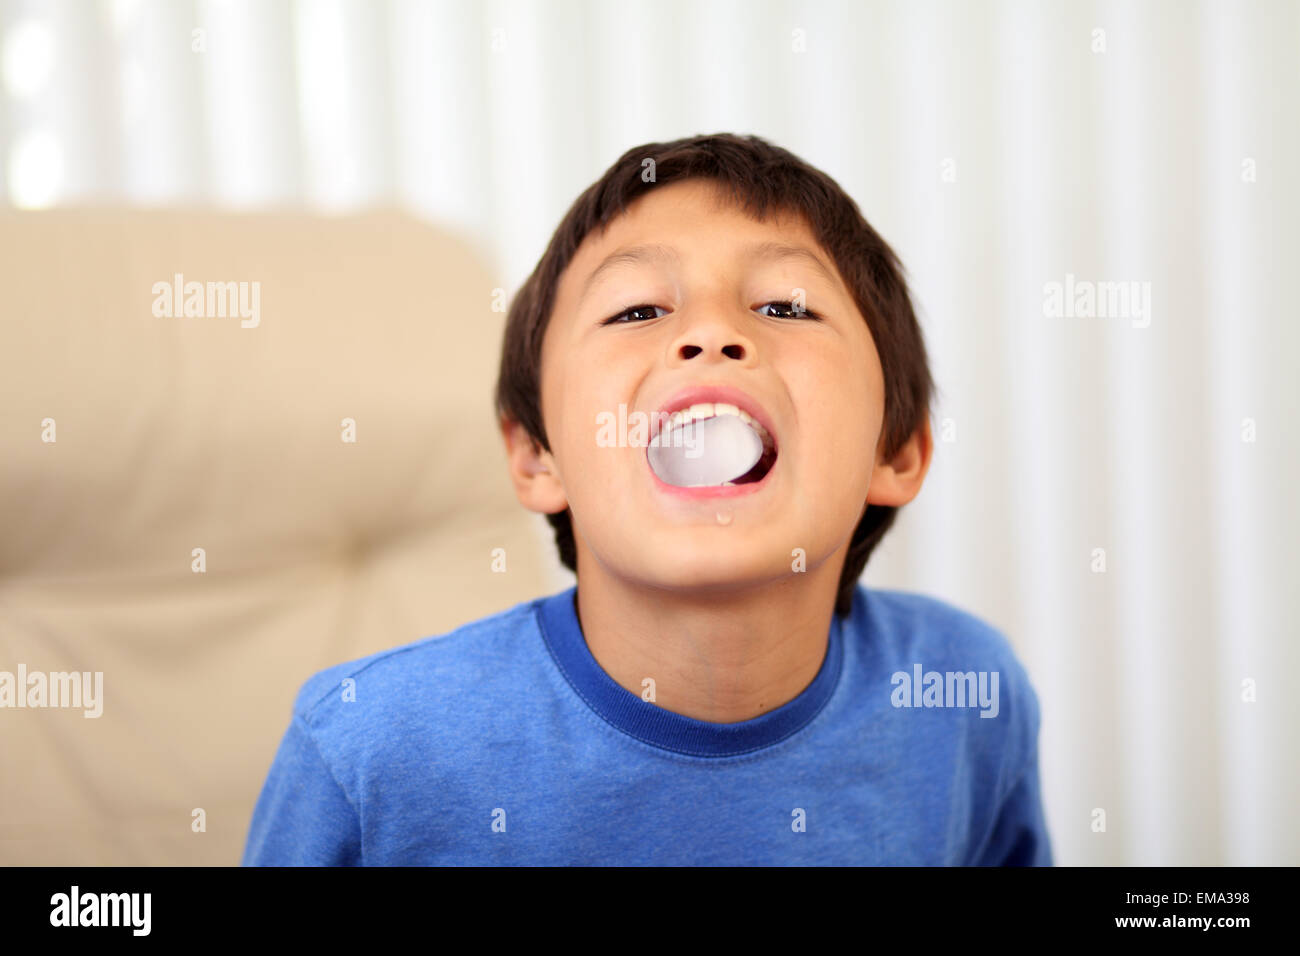 Young boy eating ice cube Stock Photo